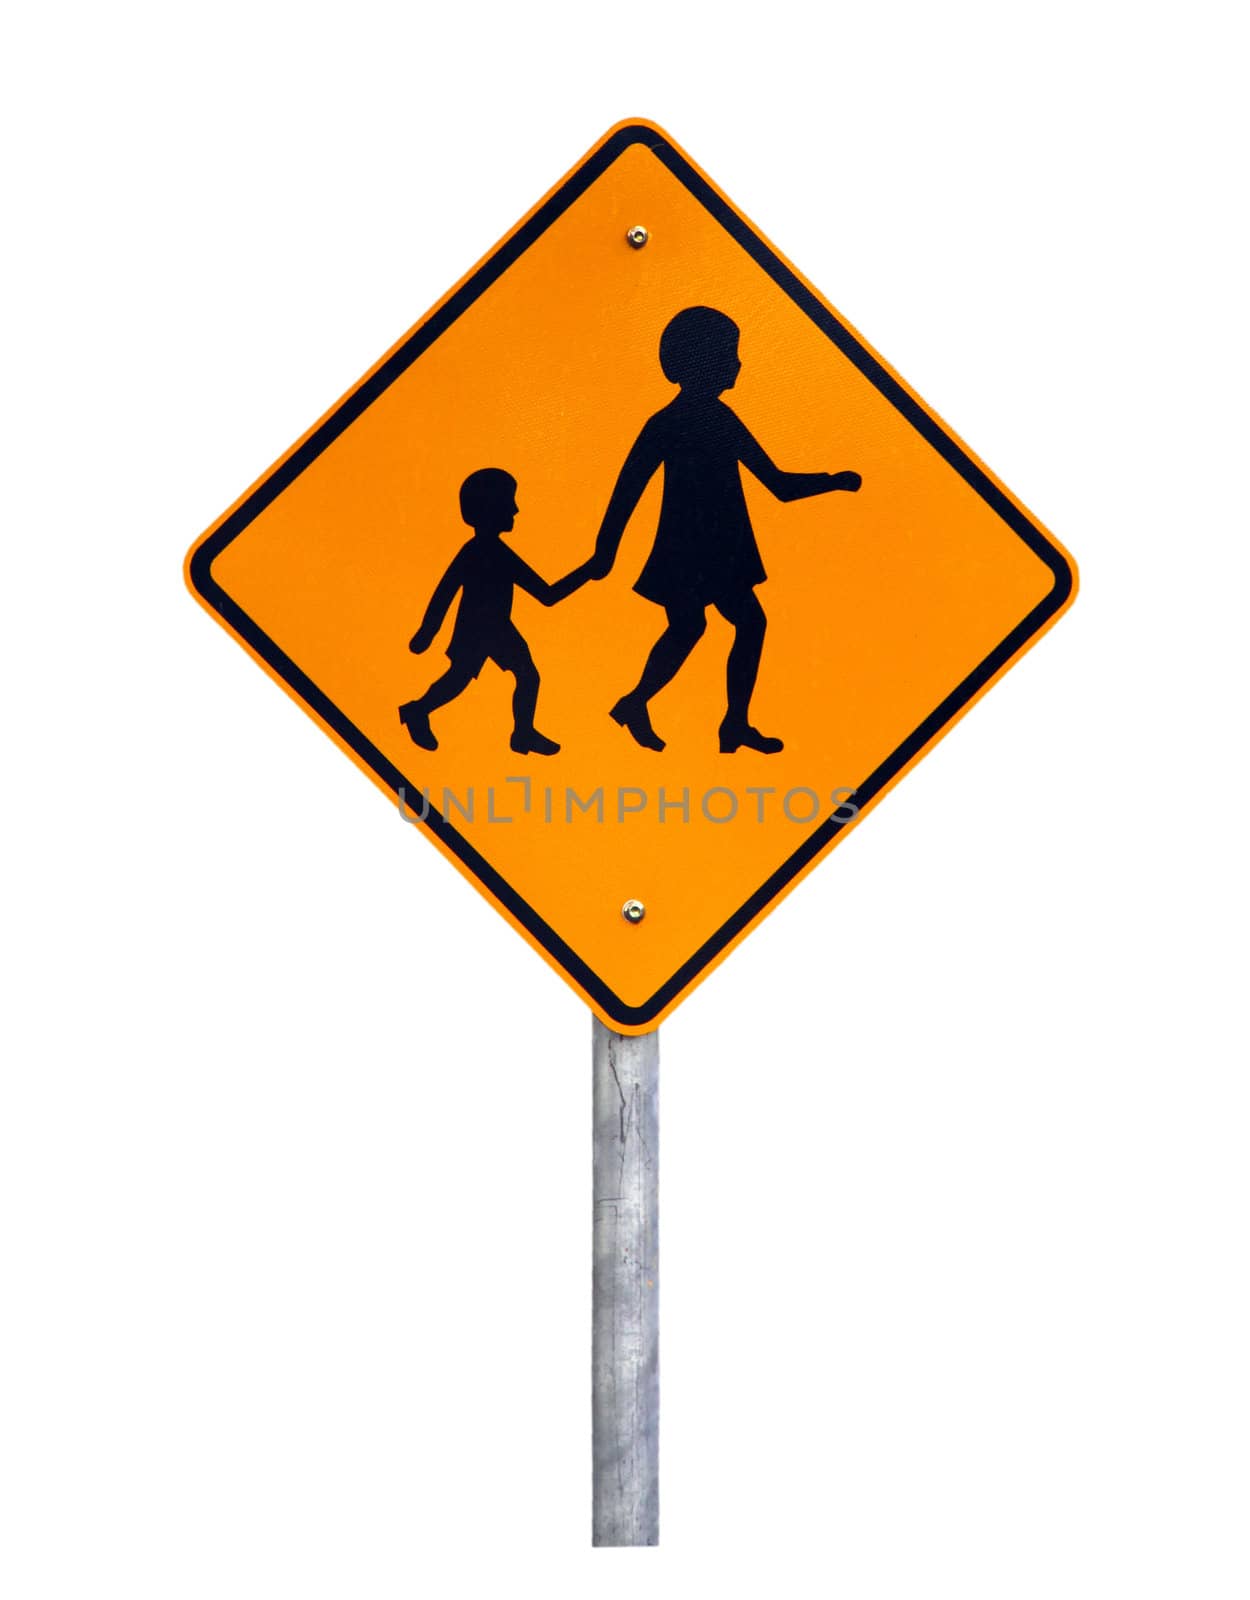 Warning Children Crossing - Current Australian Road Sign (reflective) - Isolated on White